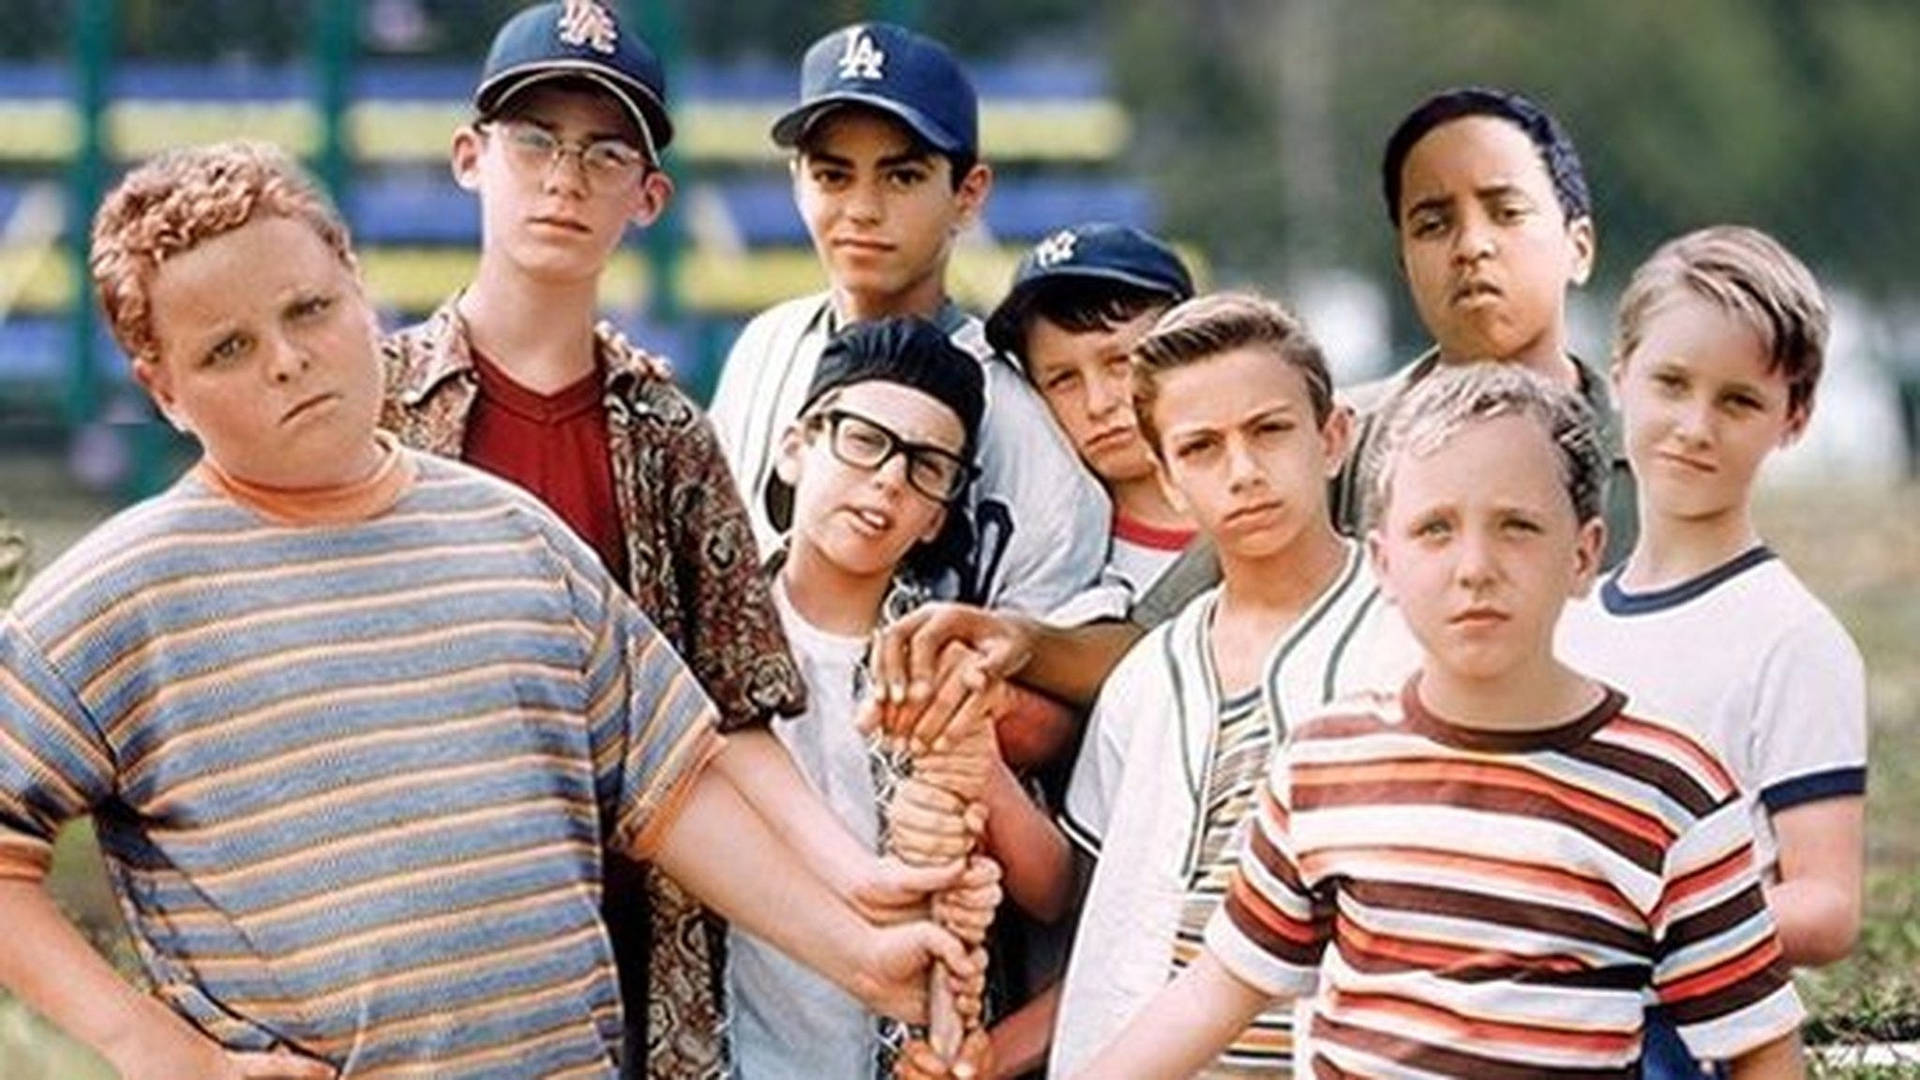 25 years later The Sandlot is still a home run